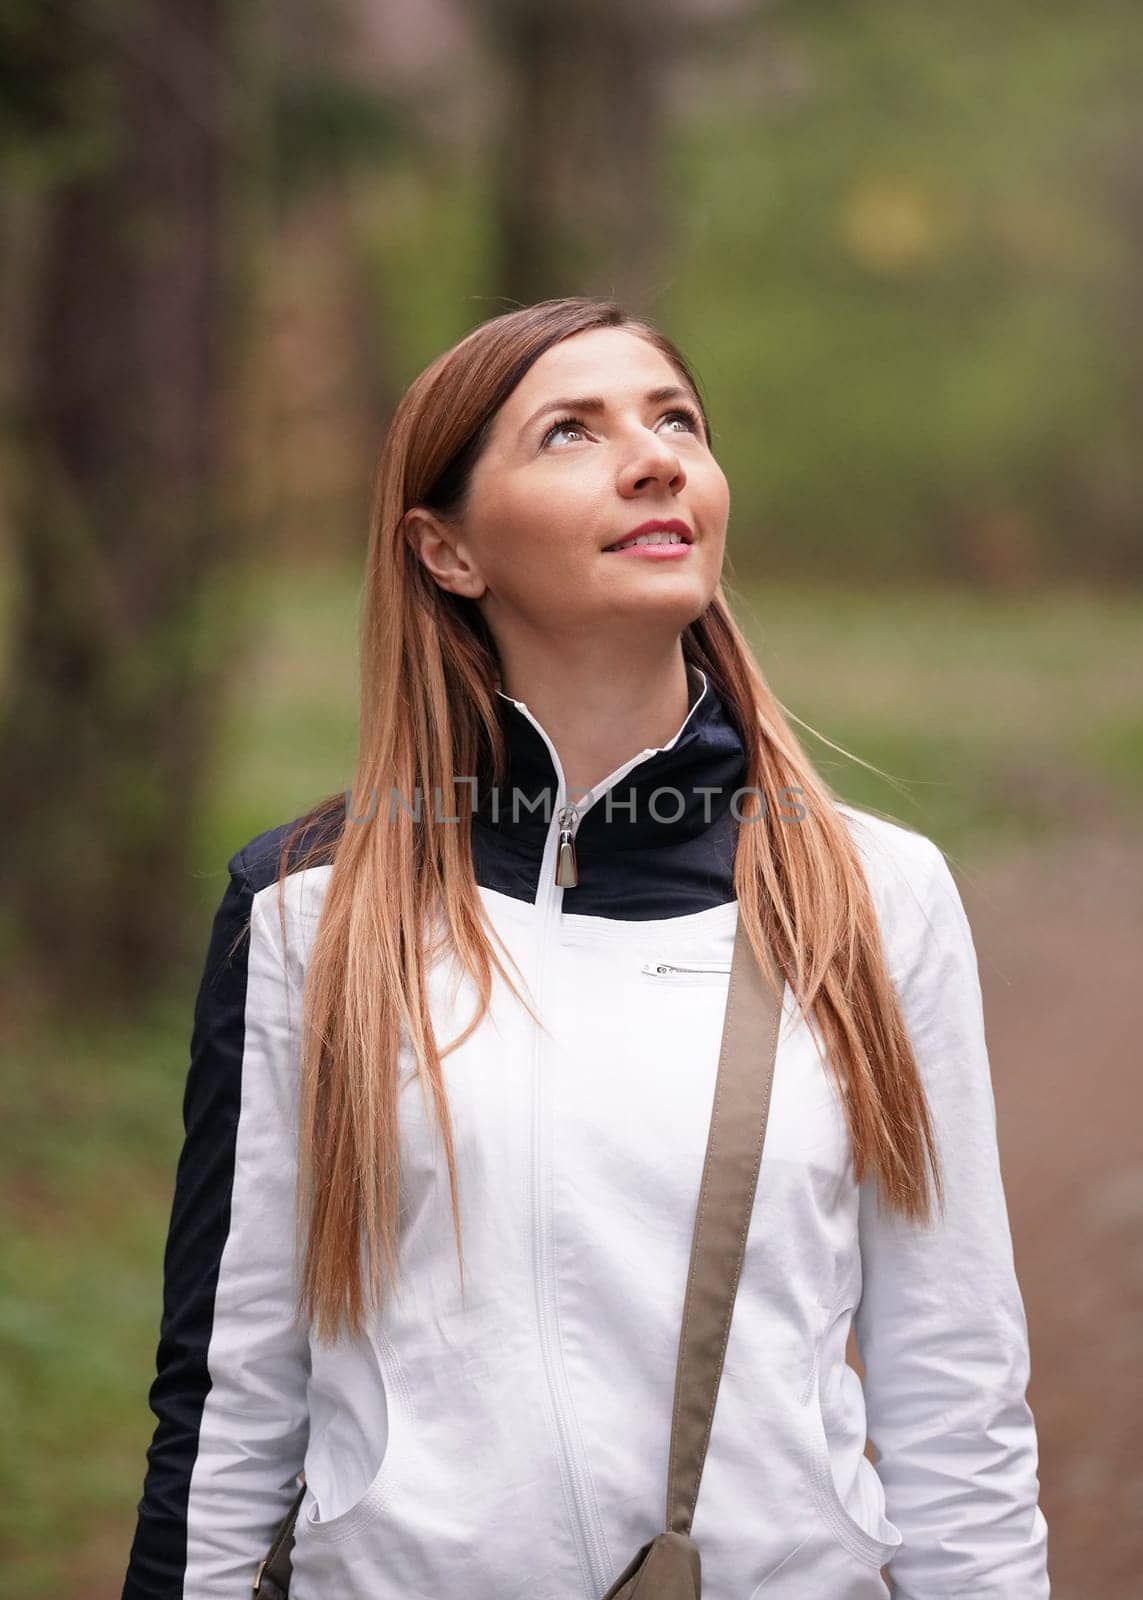 Portrait of young woman wearing white sport jacket, looking up, blurred trees in background by Ivanko